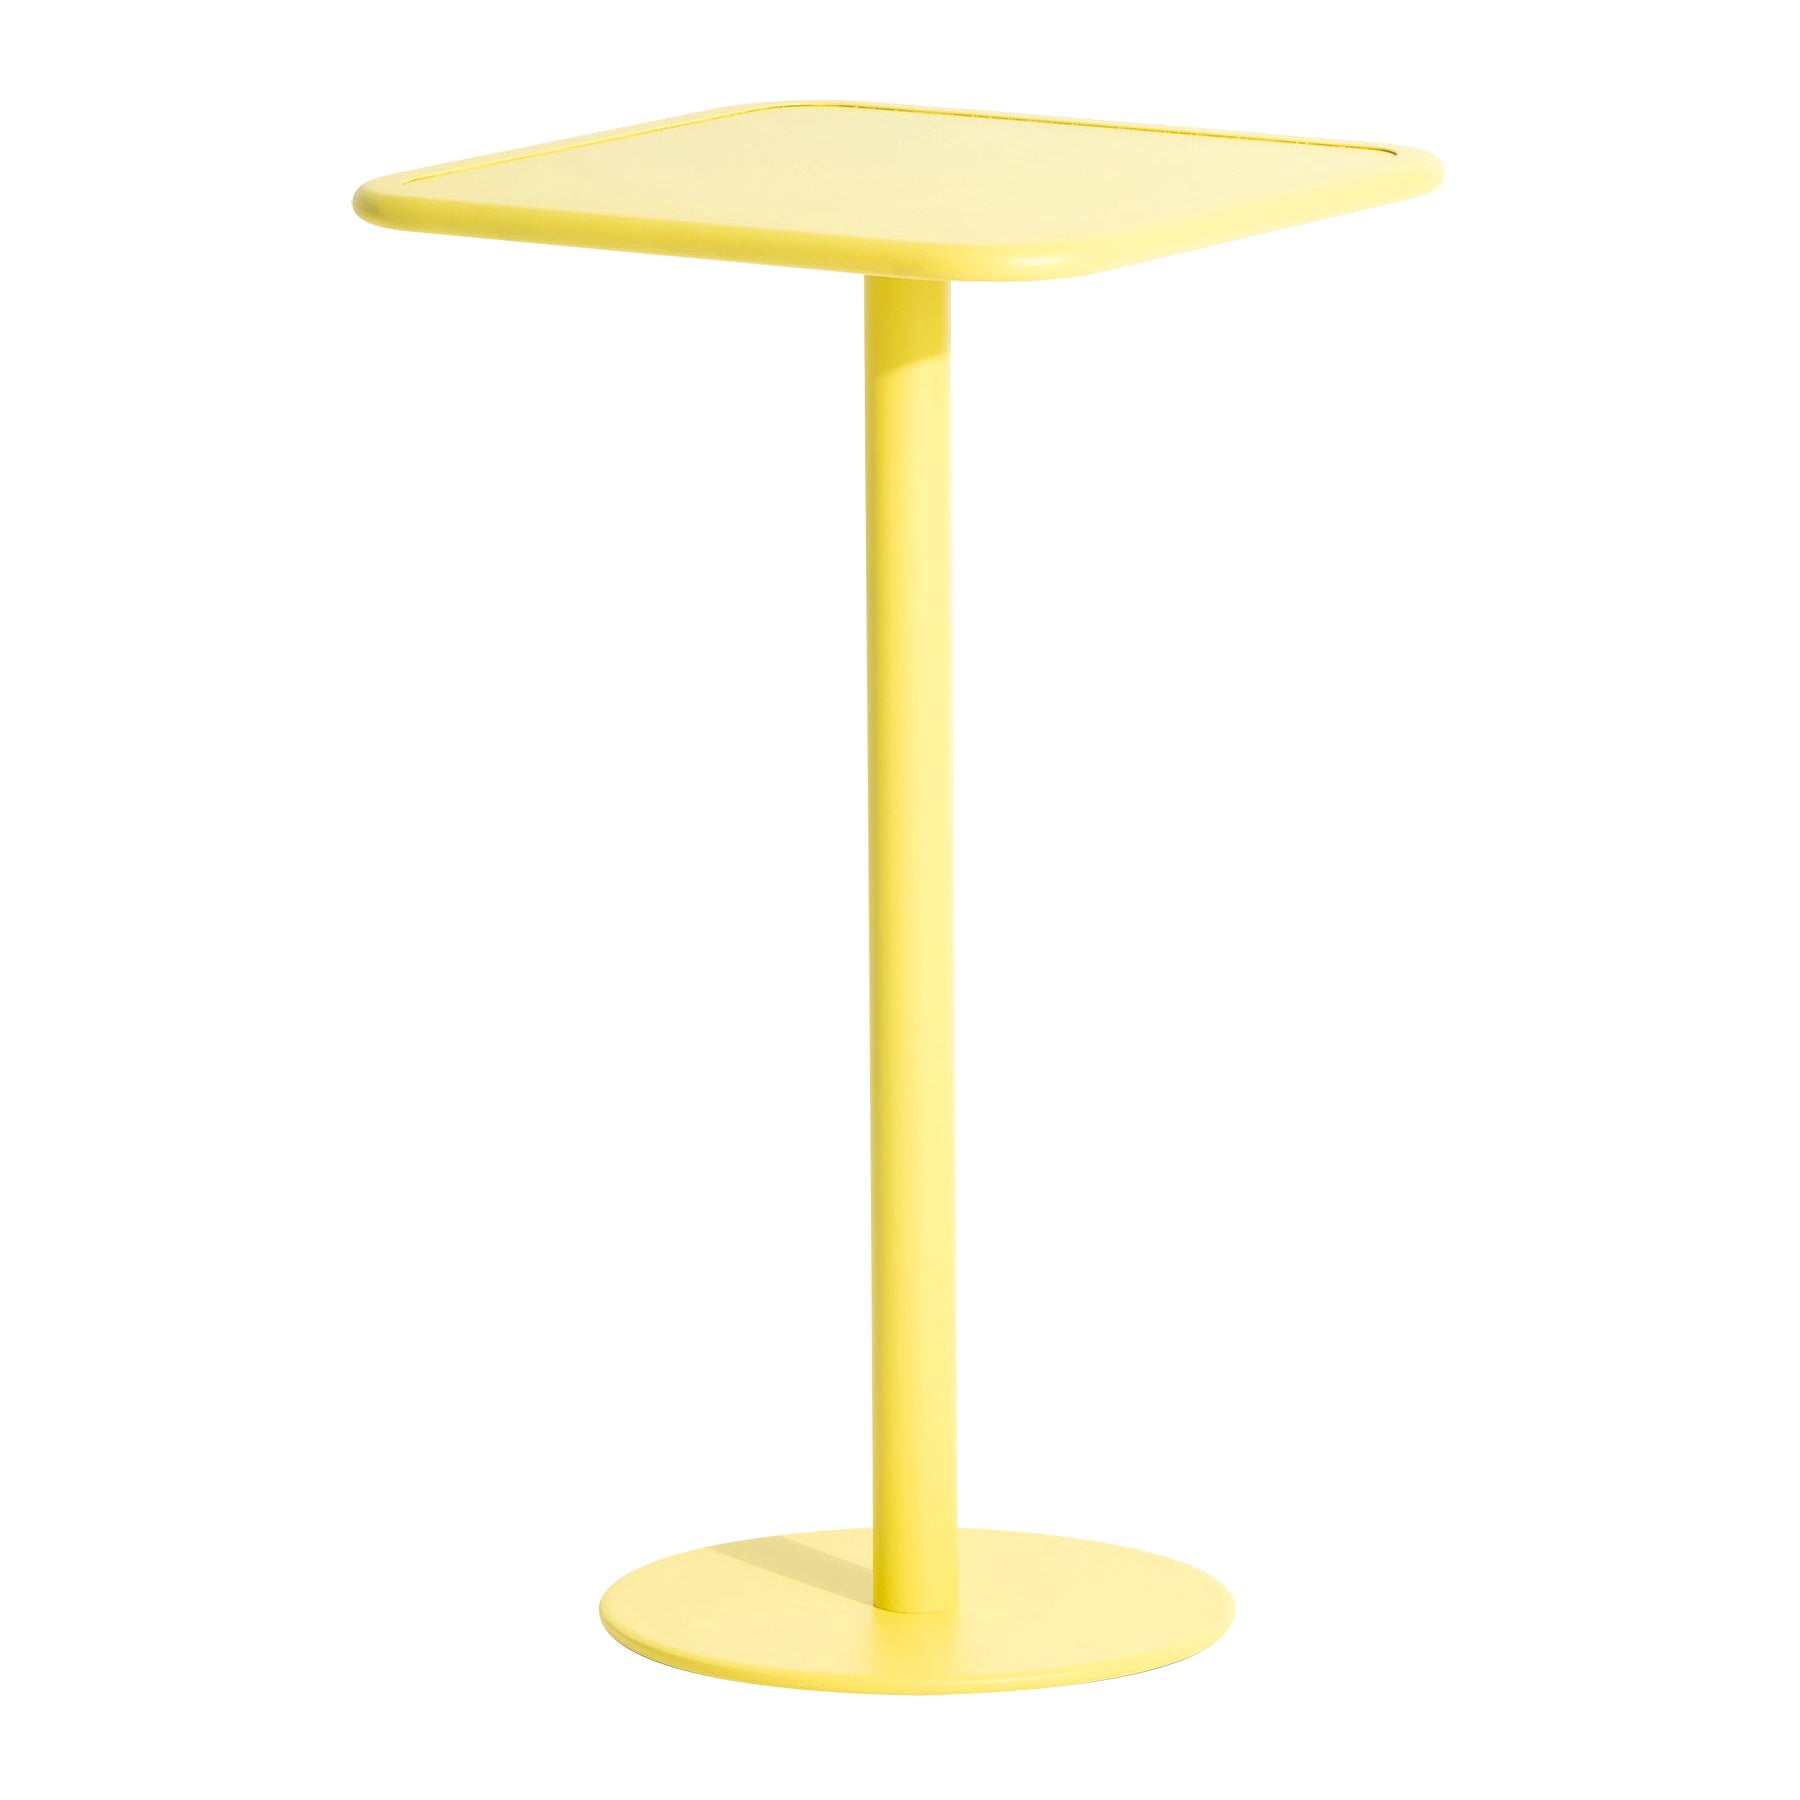 Petite Friture Week-End Square High Table in Yellow Aluminium, 2017